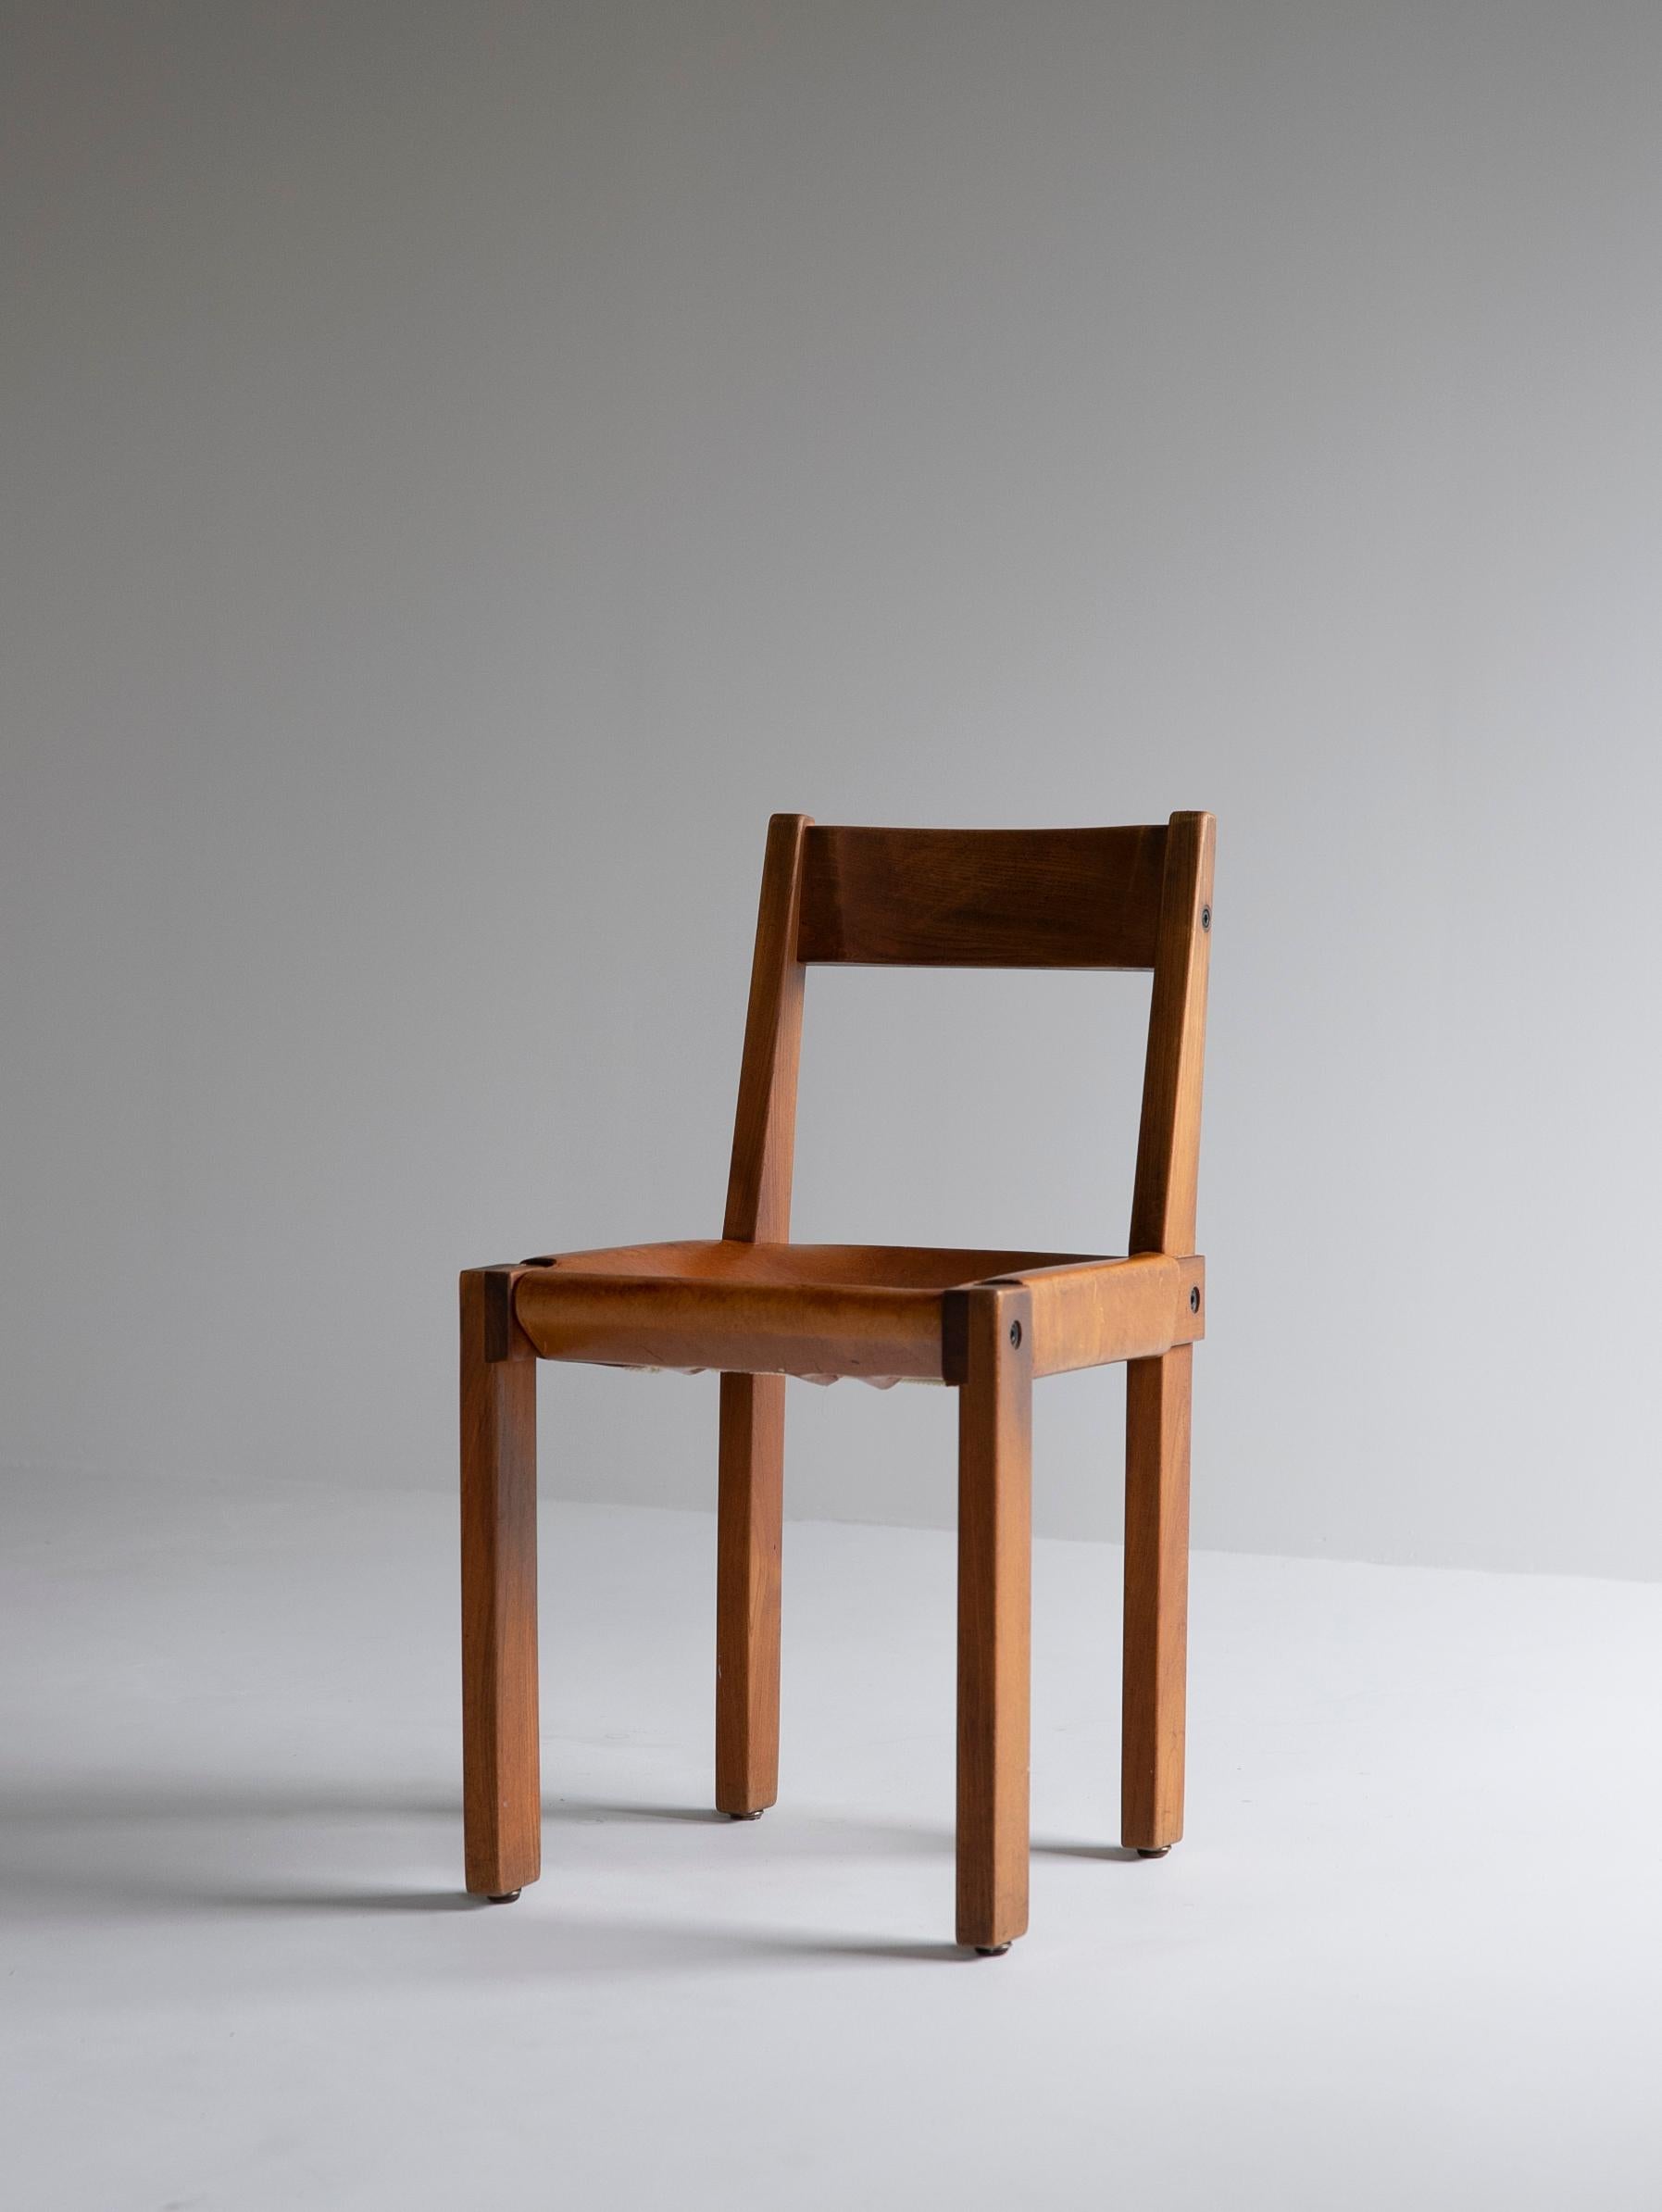 Pierre Chapo I Pierre Chapo 'S24'.

Pierre Chapot 1927-1987.

French furniture designer and craftsman. Pierre Chapo studied architecture at the Ecole Nationale Supérieure des Beaux-Arts in Paris, graduating in 1958. He then travelled in